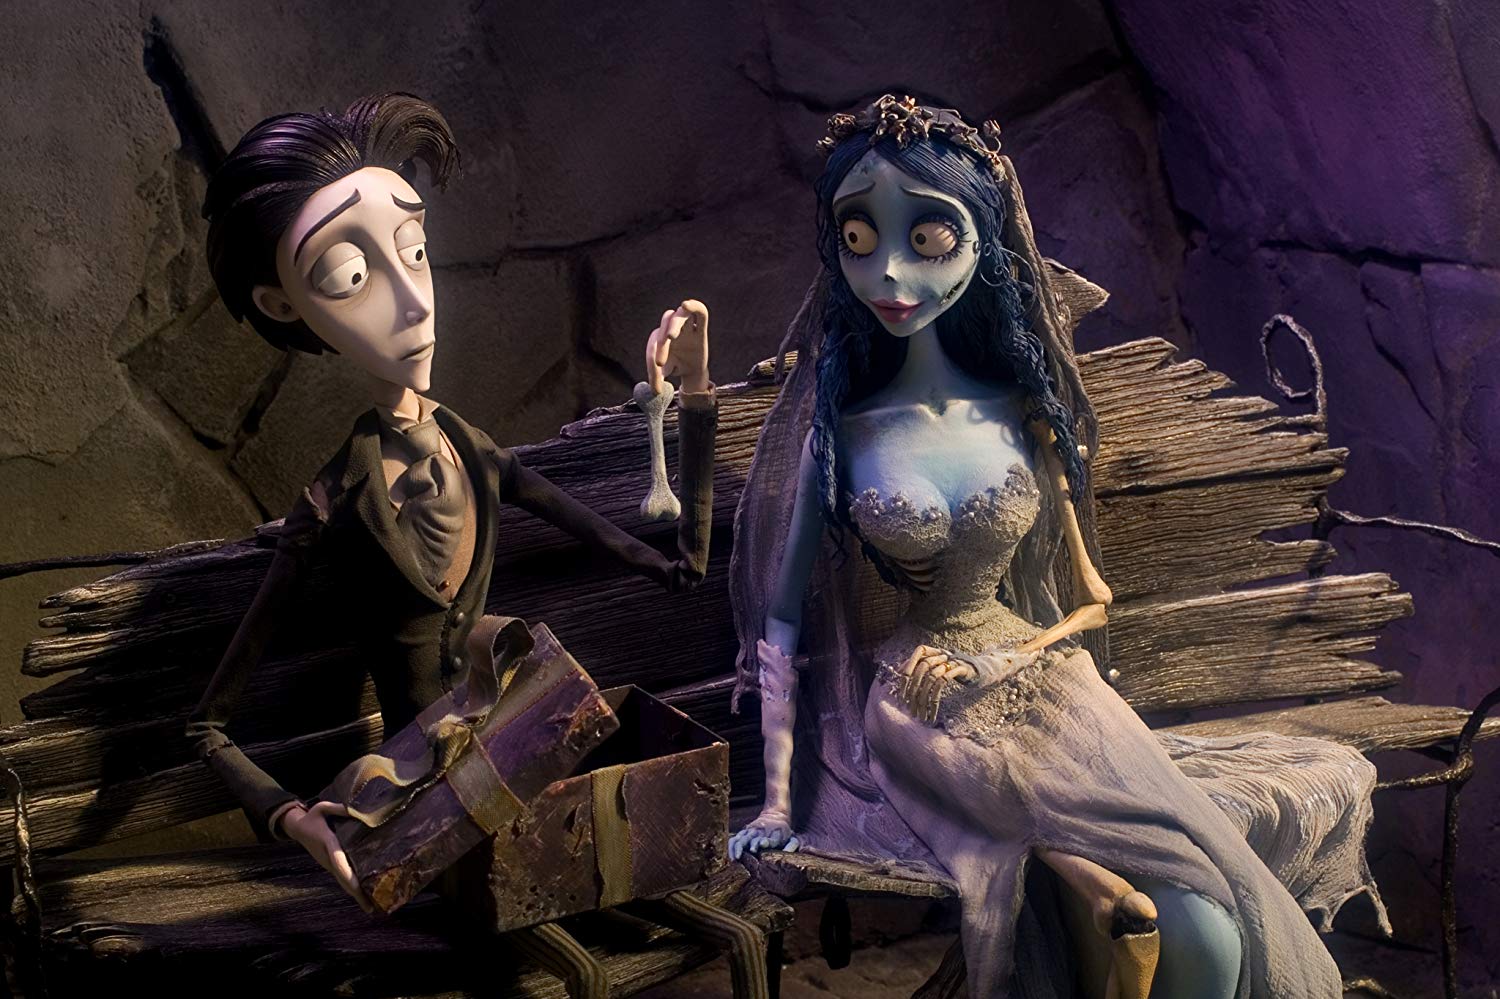 Victor Van Dort (voiced by Johnny Depp) and Emily the corpse bride (voiced by Helena Bonham Carter) in Corpse Bride (2005)